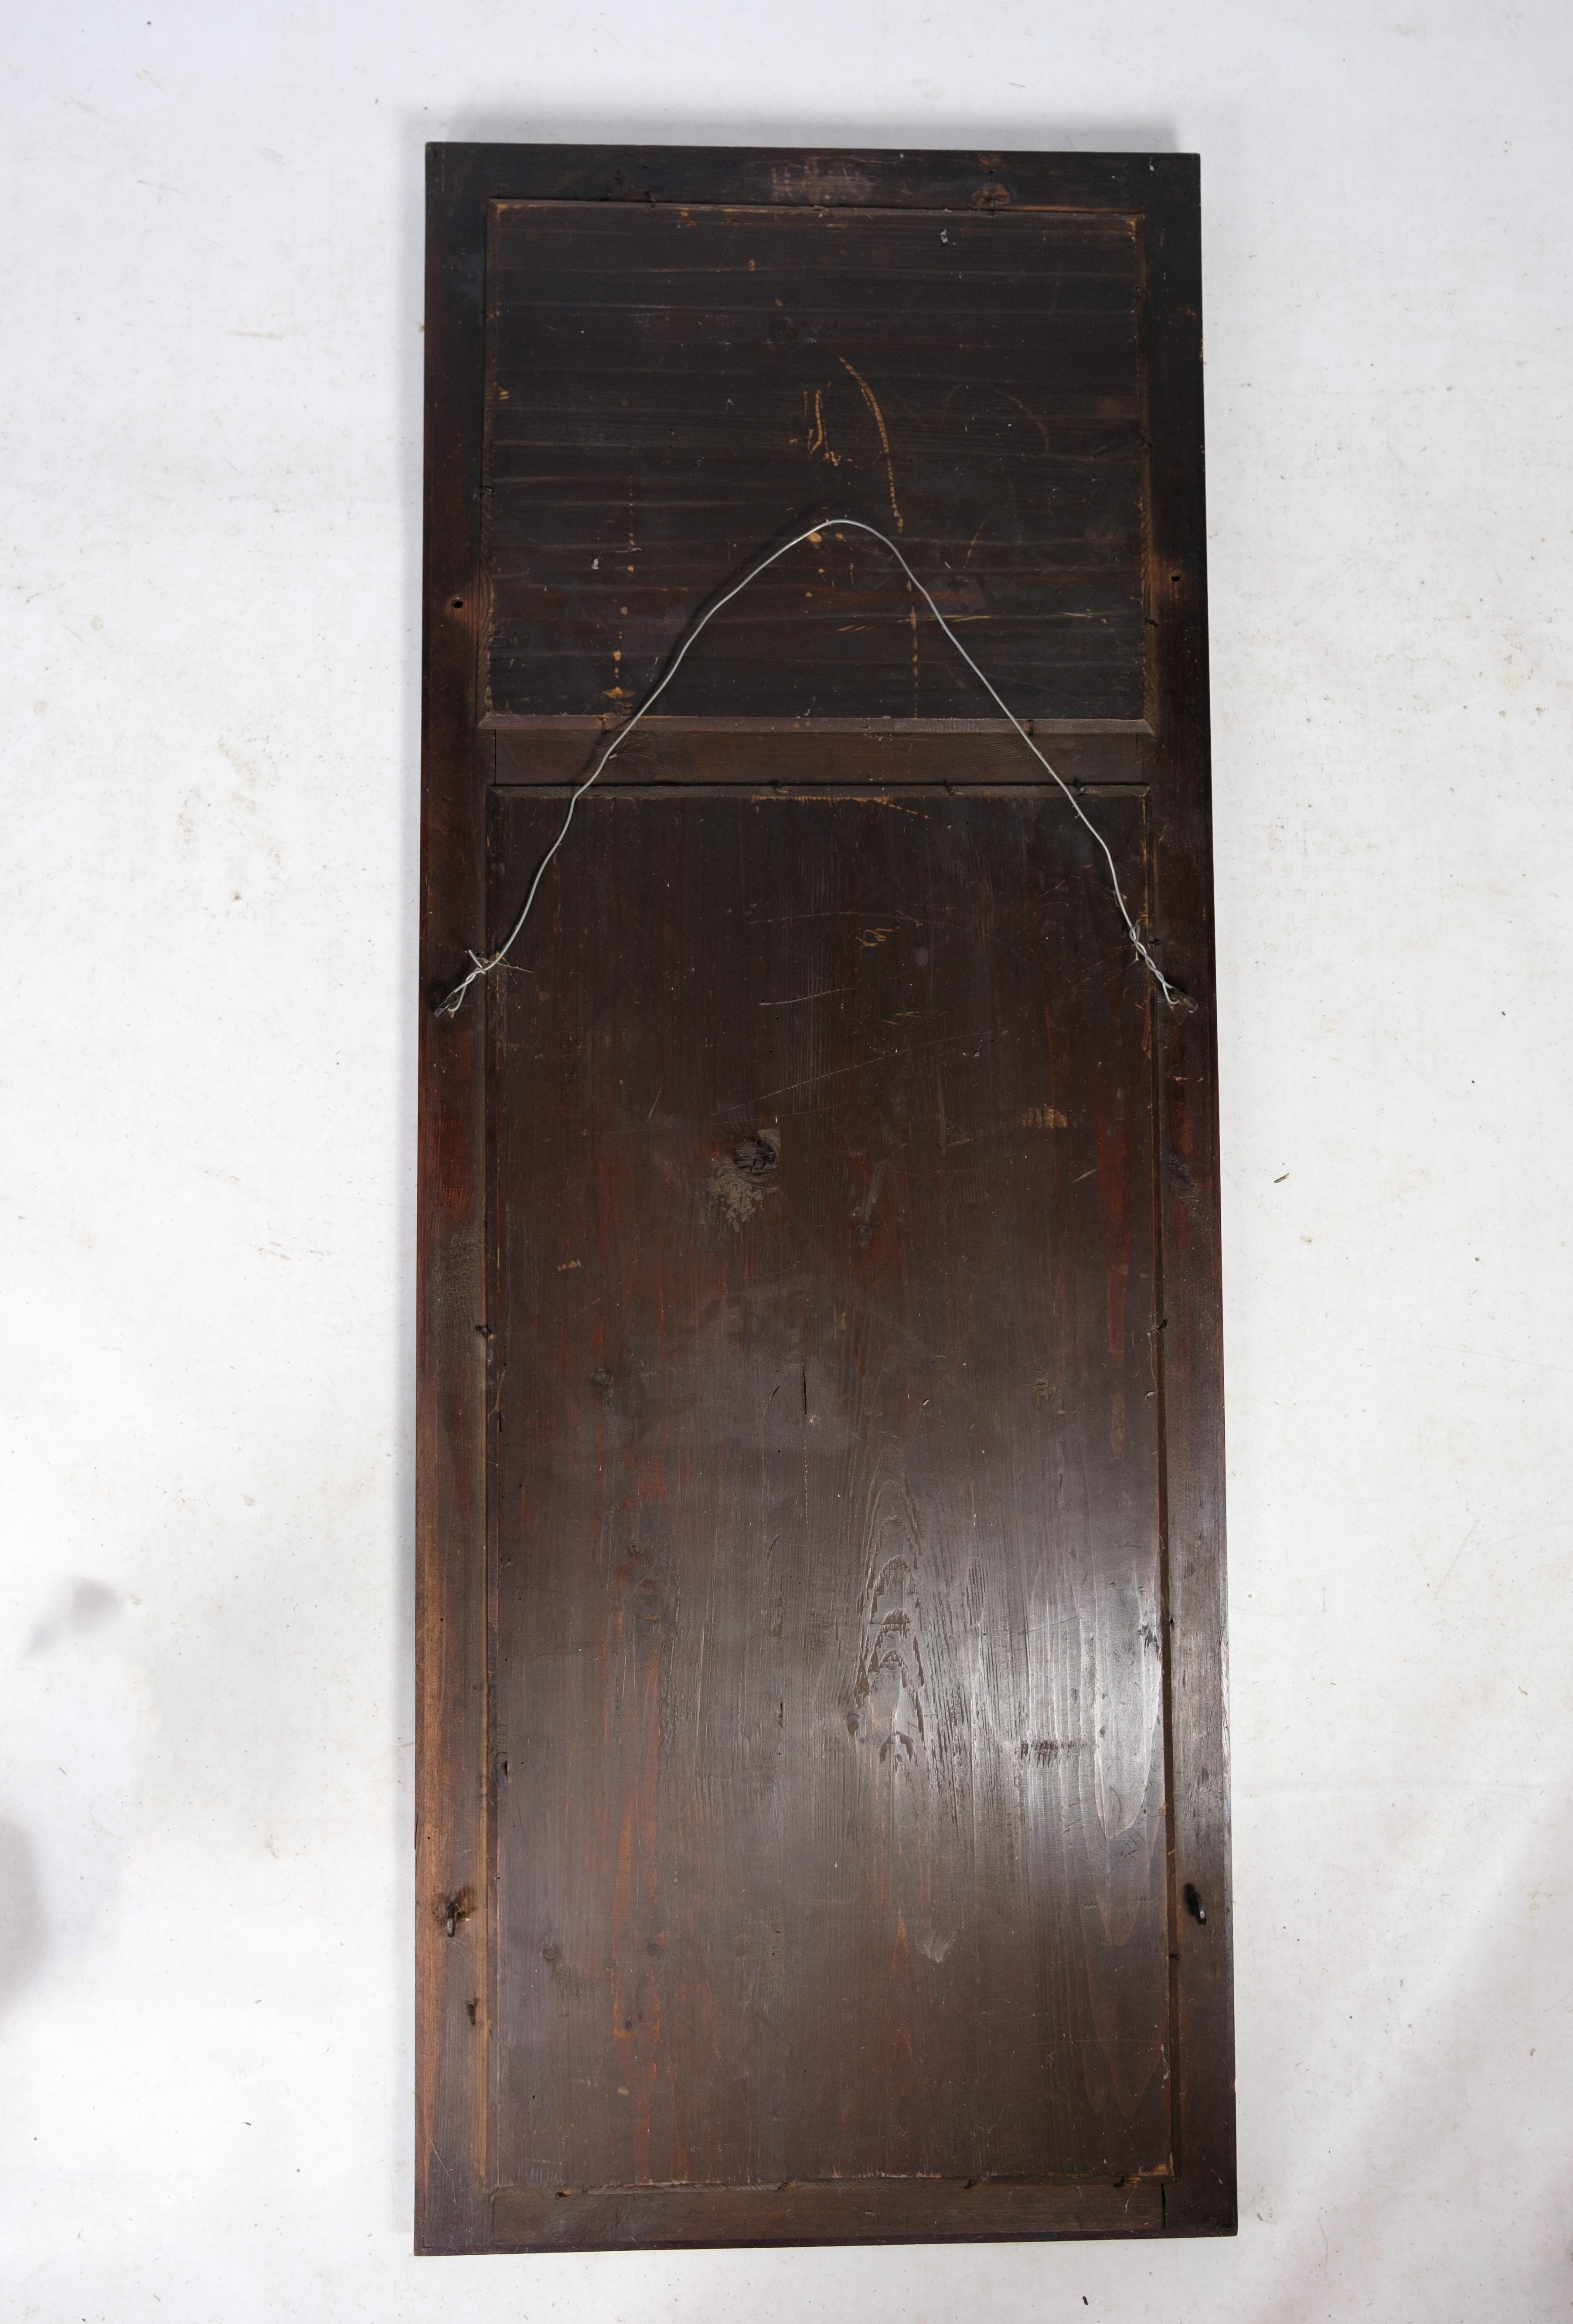 Danish Scandinavian Modern Mirror in Mahogany of Louis Seize Period about the 1780 For Sale